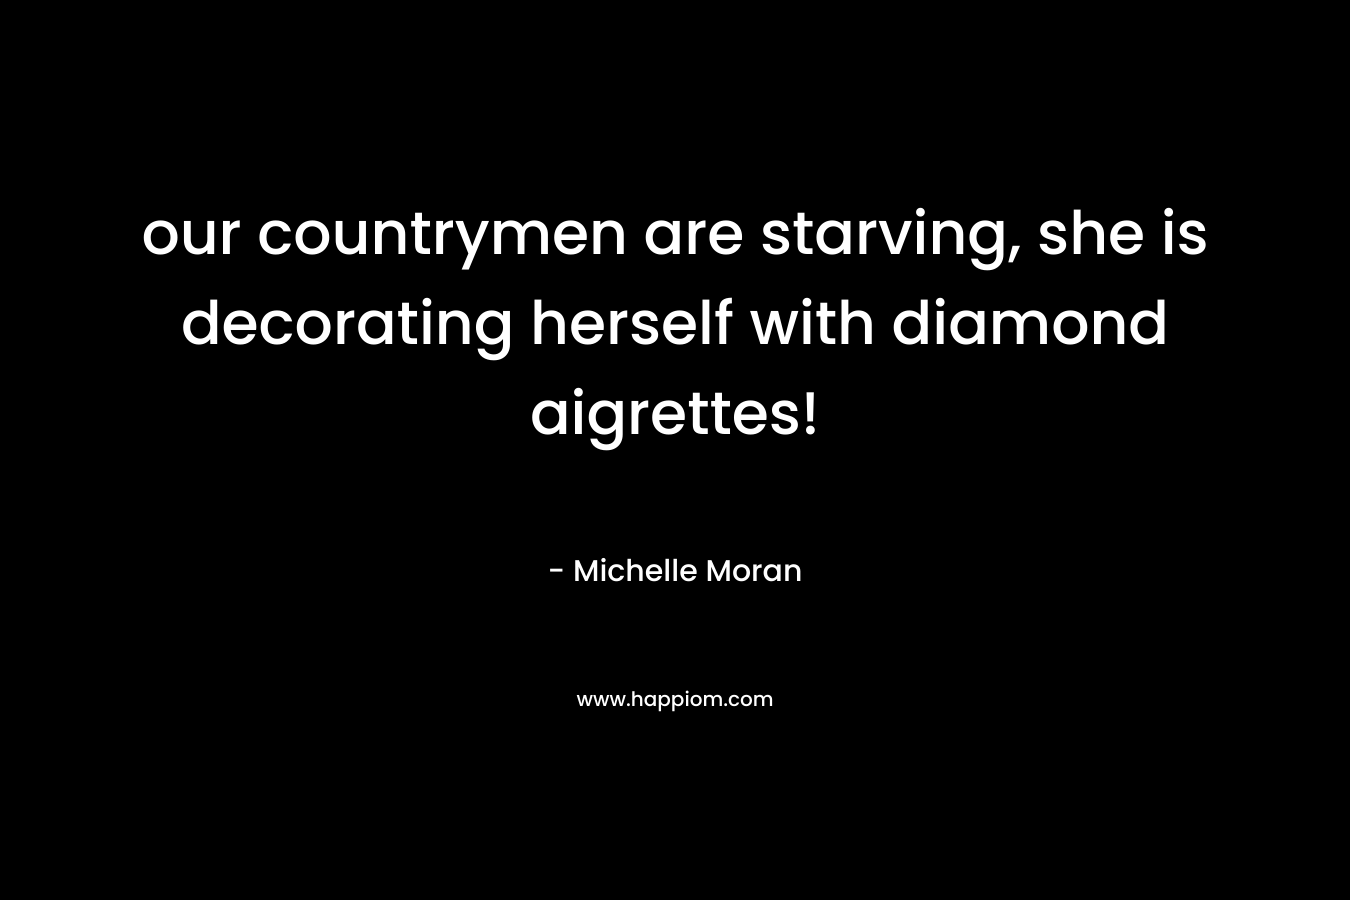 our countrymen are starving, she is decorating herself with diamond aigrettes! – Michelle Moran